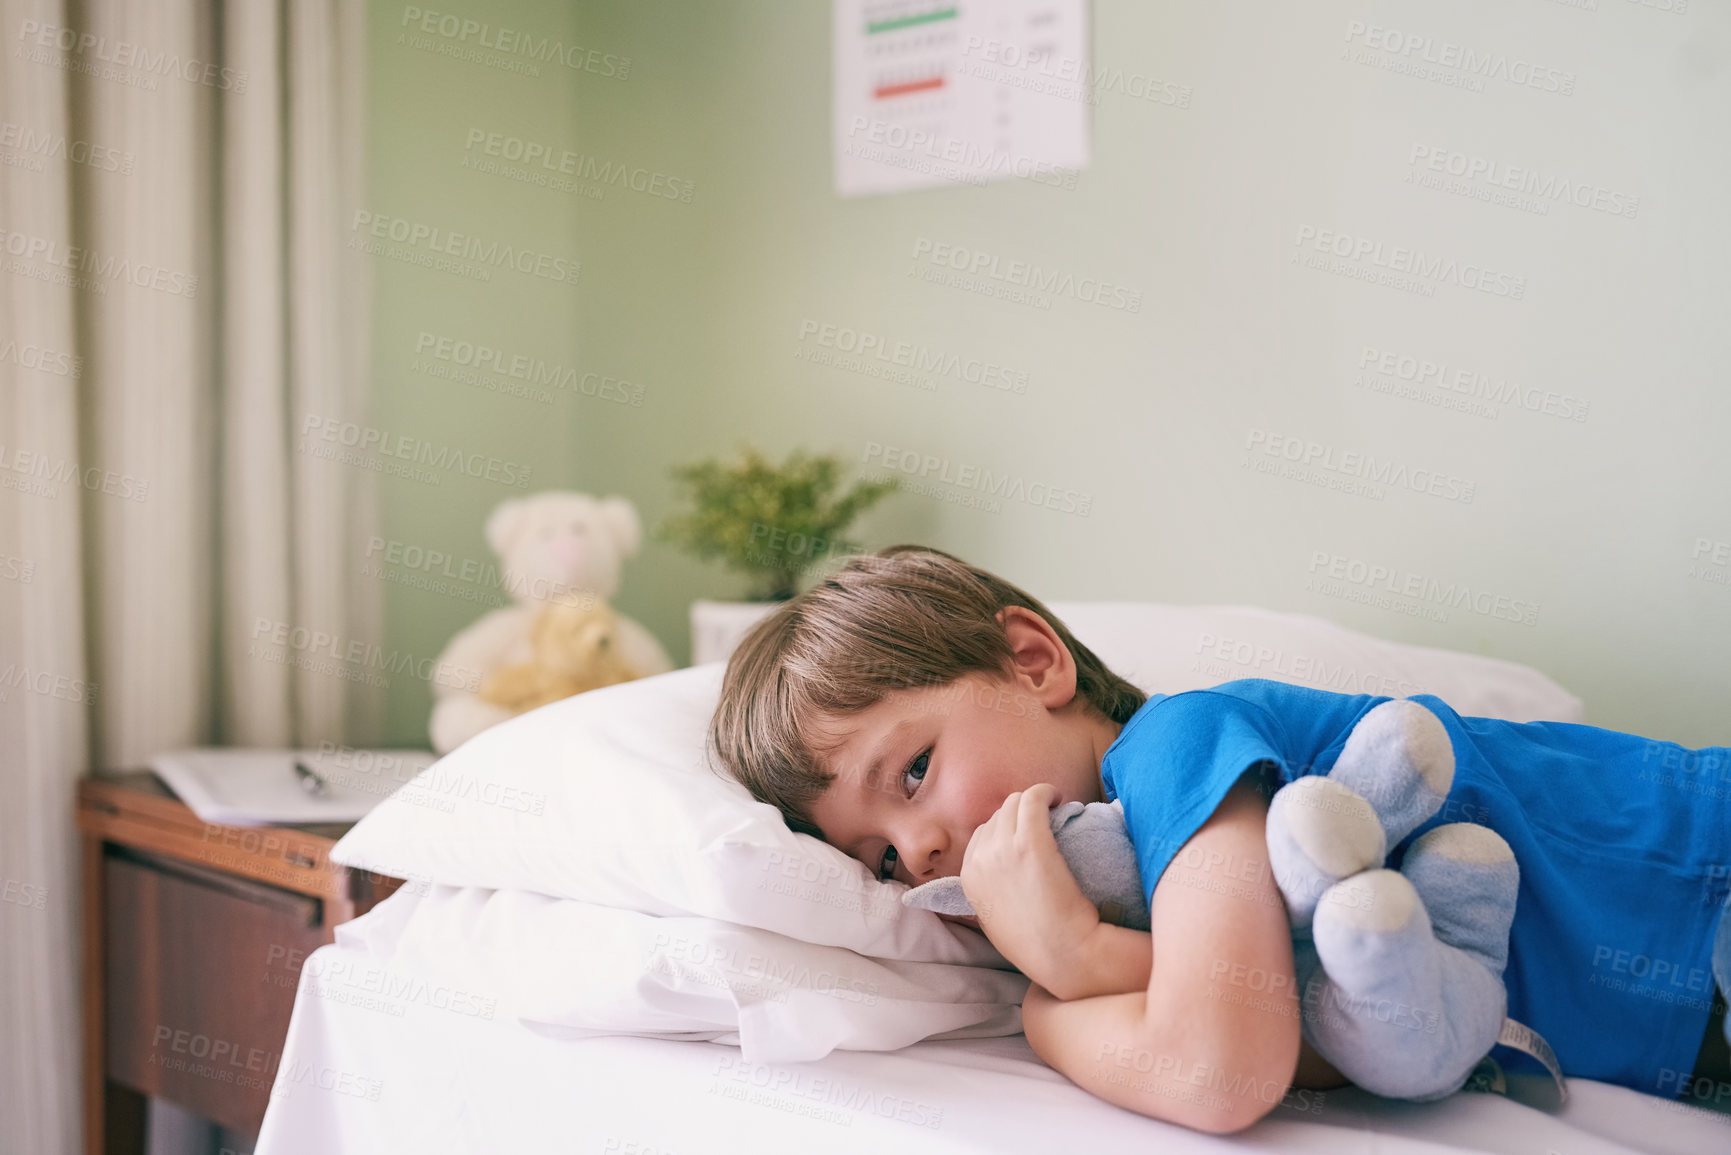 Buy stock photo Shot of a little boy lying on a hospital bed while holding on tight to his stuffed animal